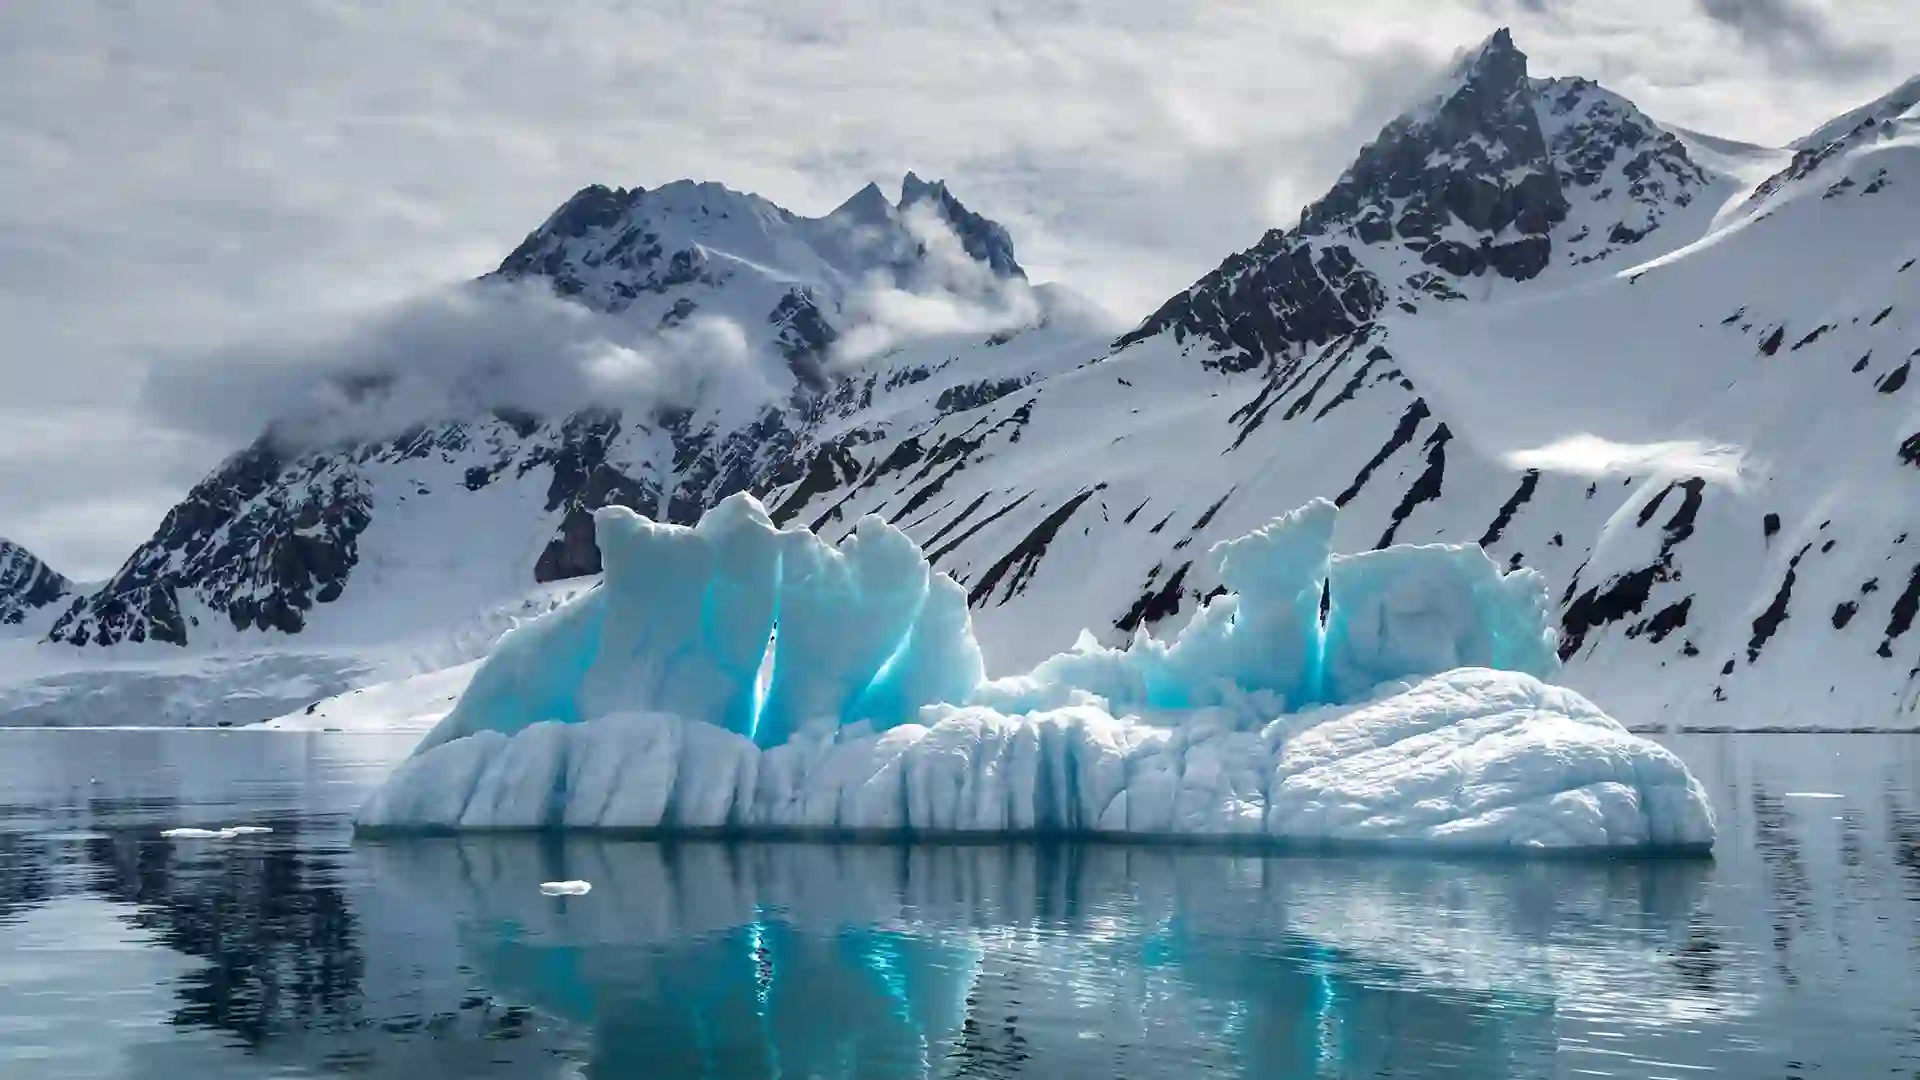 Snow-capped mountains and icy-blue glacier with water below.